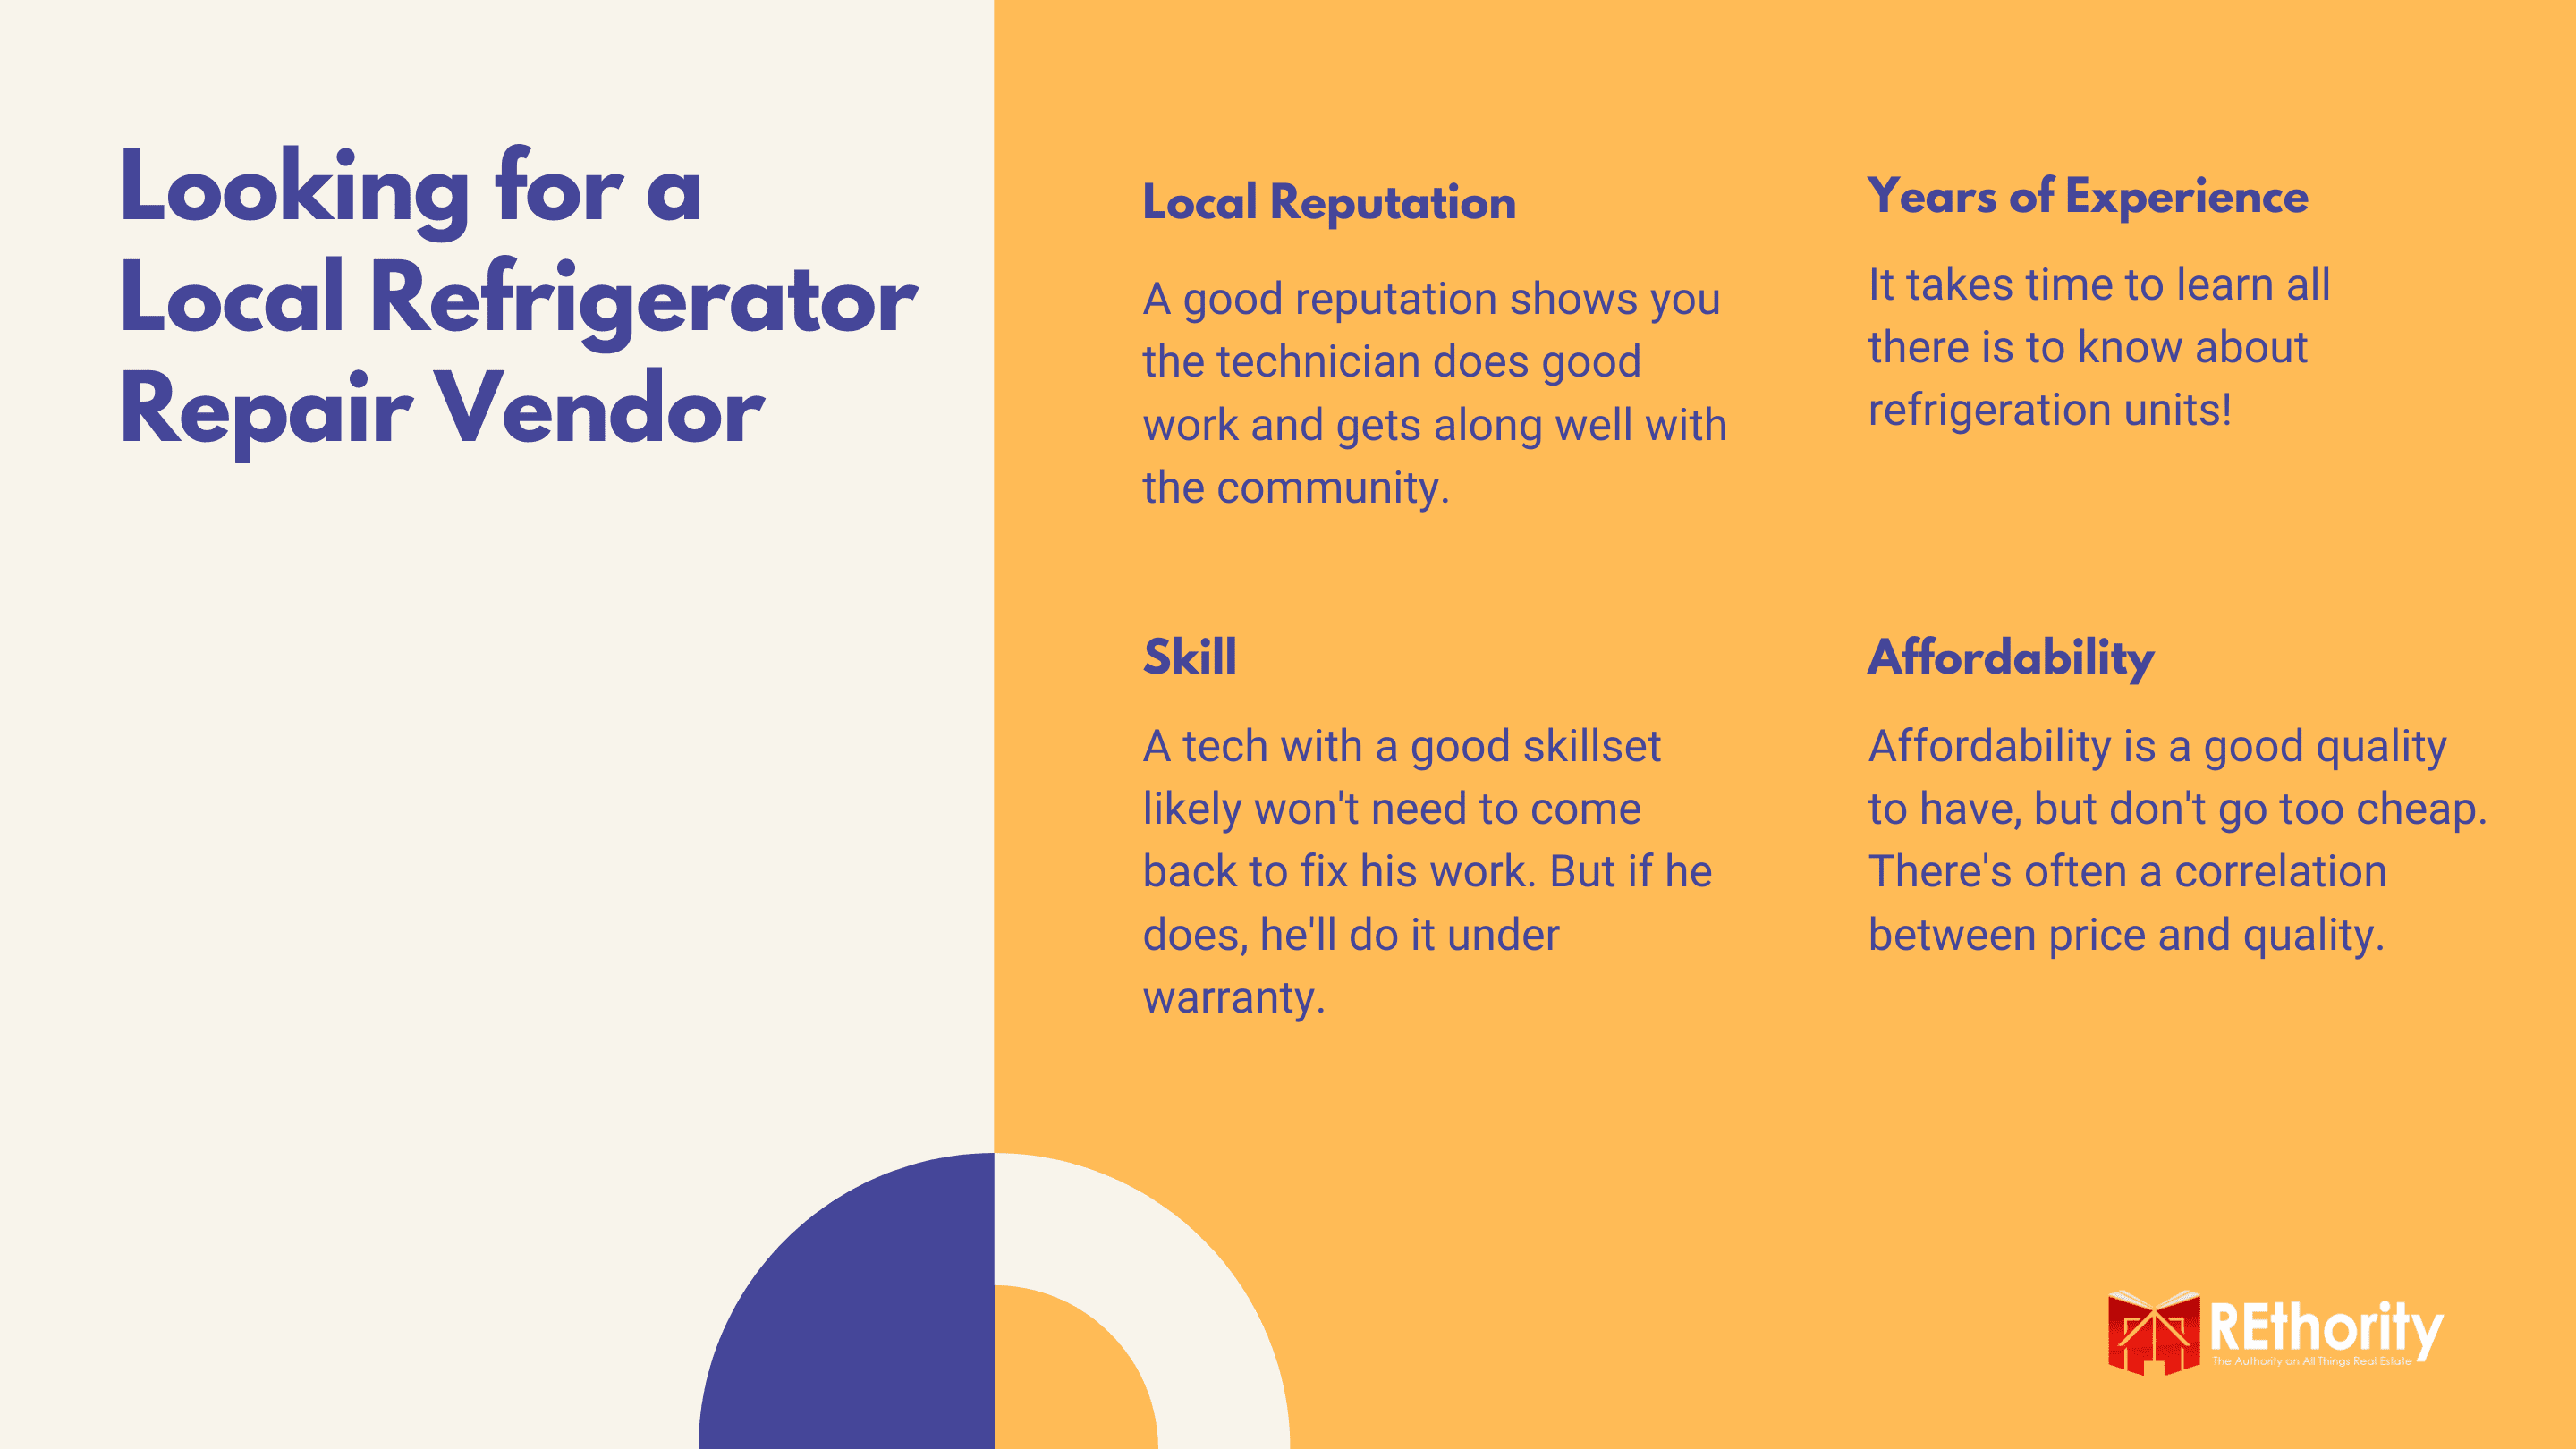 Looking for a Local Refrigerator Repair Vendor graphic explaining common traits that are good to have